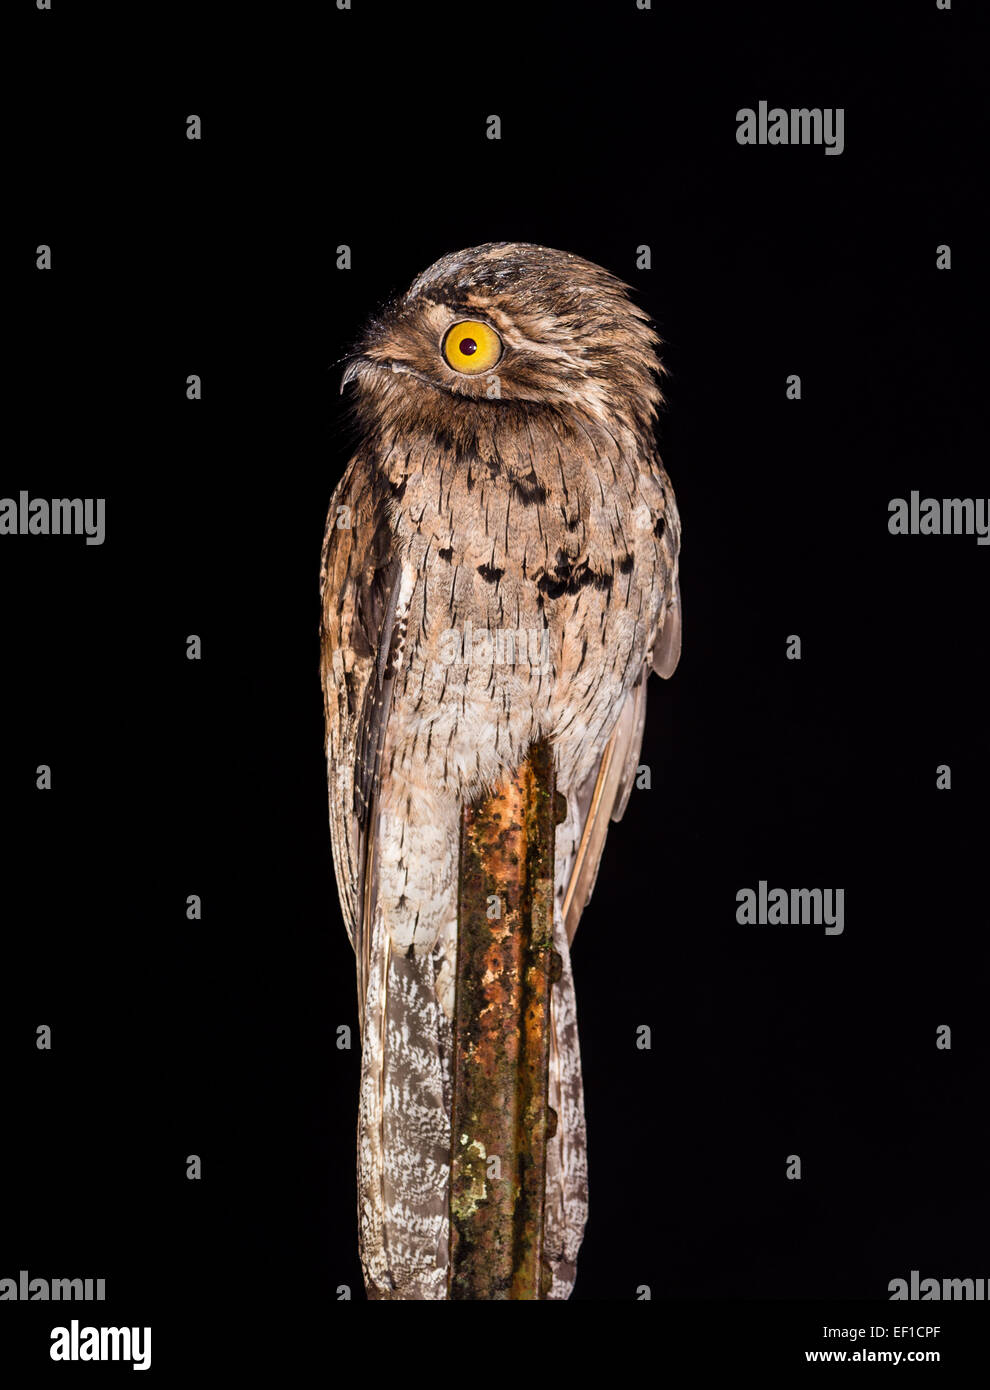 Northern Potoo (Nyctibius jamaicensis) at night. Belize, Central America. Stock Photo